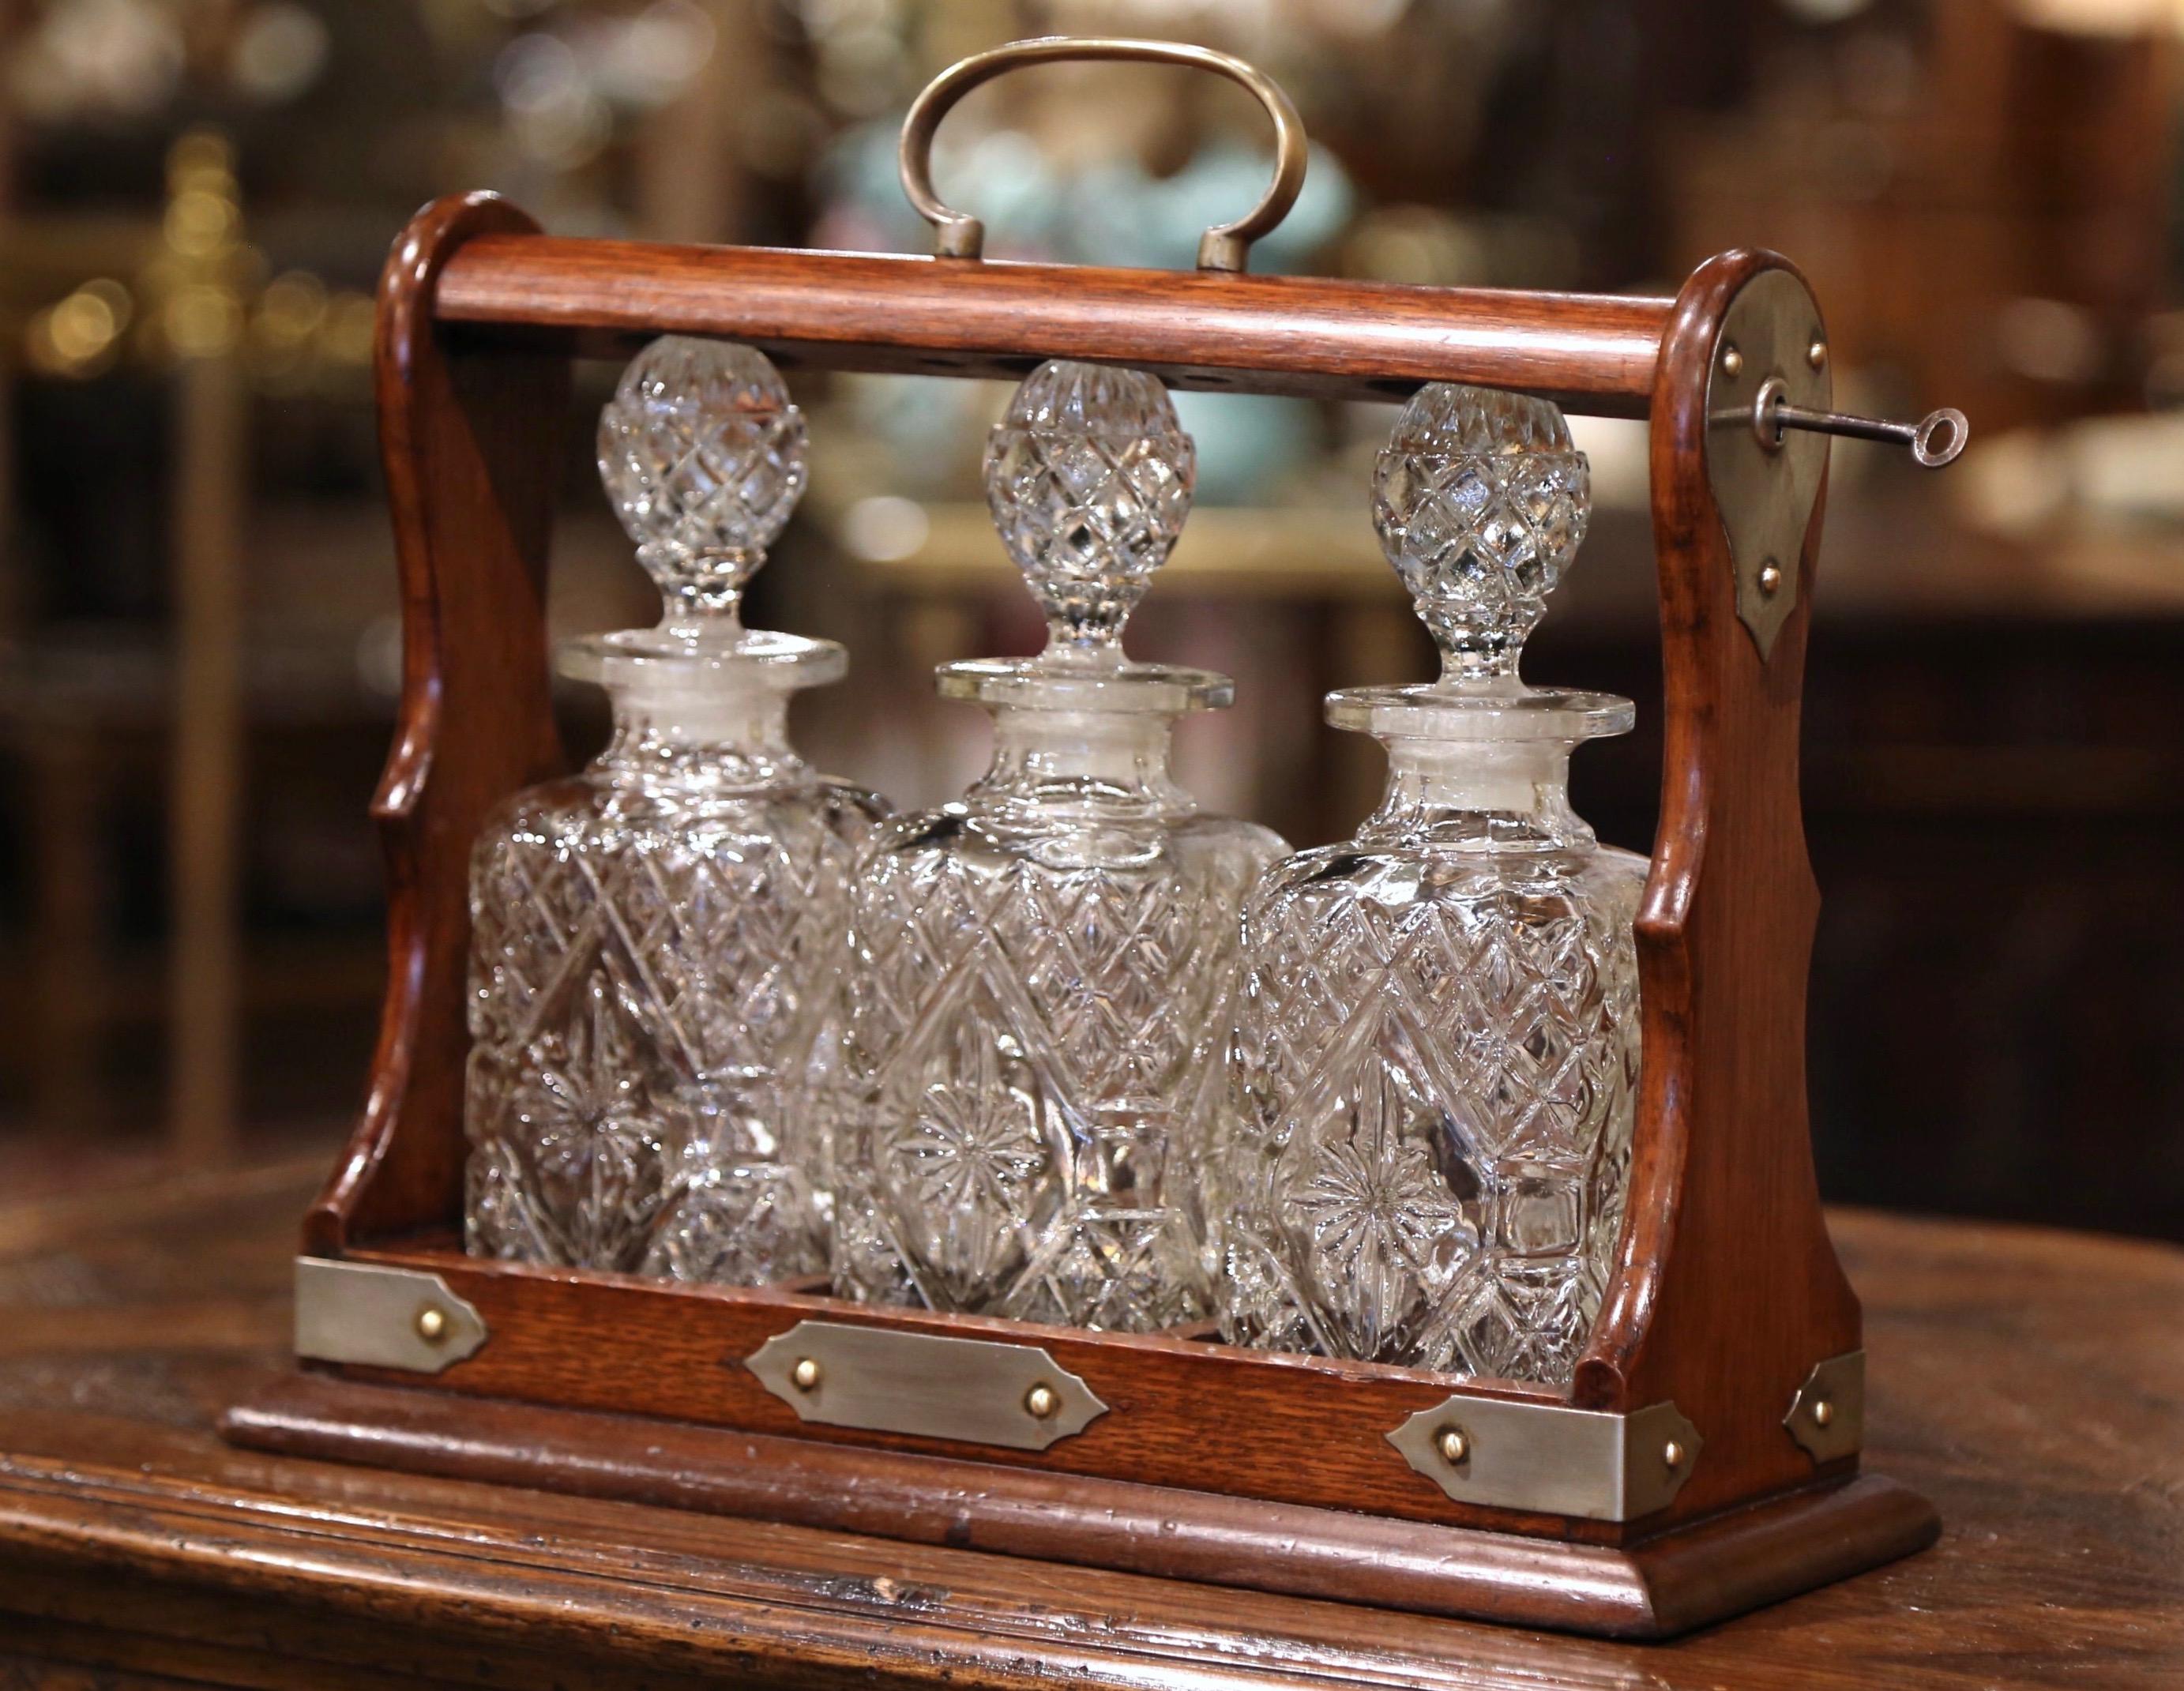 Entertain in style with this antique oak Tantalus and crystal decanter set; crafted in England, circa 1920, the liquor set is unique with nickel silver side mounts and its original ball faceted swivel locking mechanism with key, and embellished with